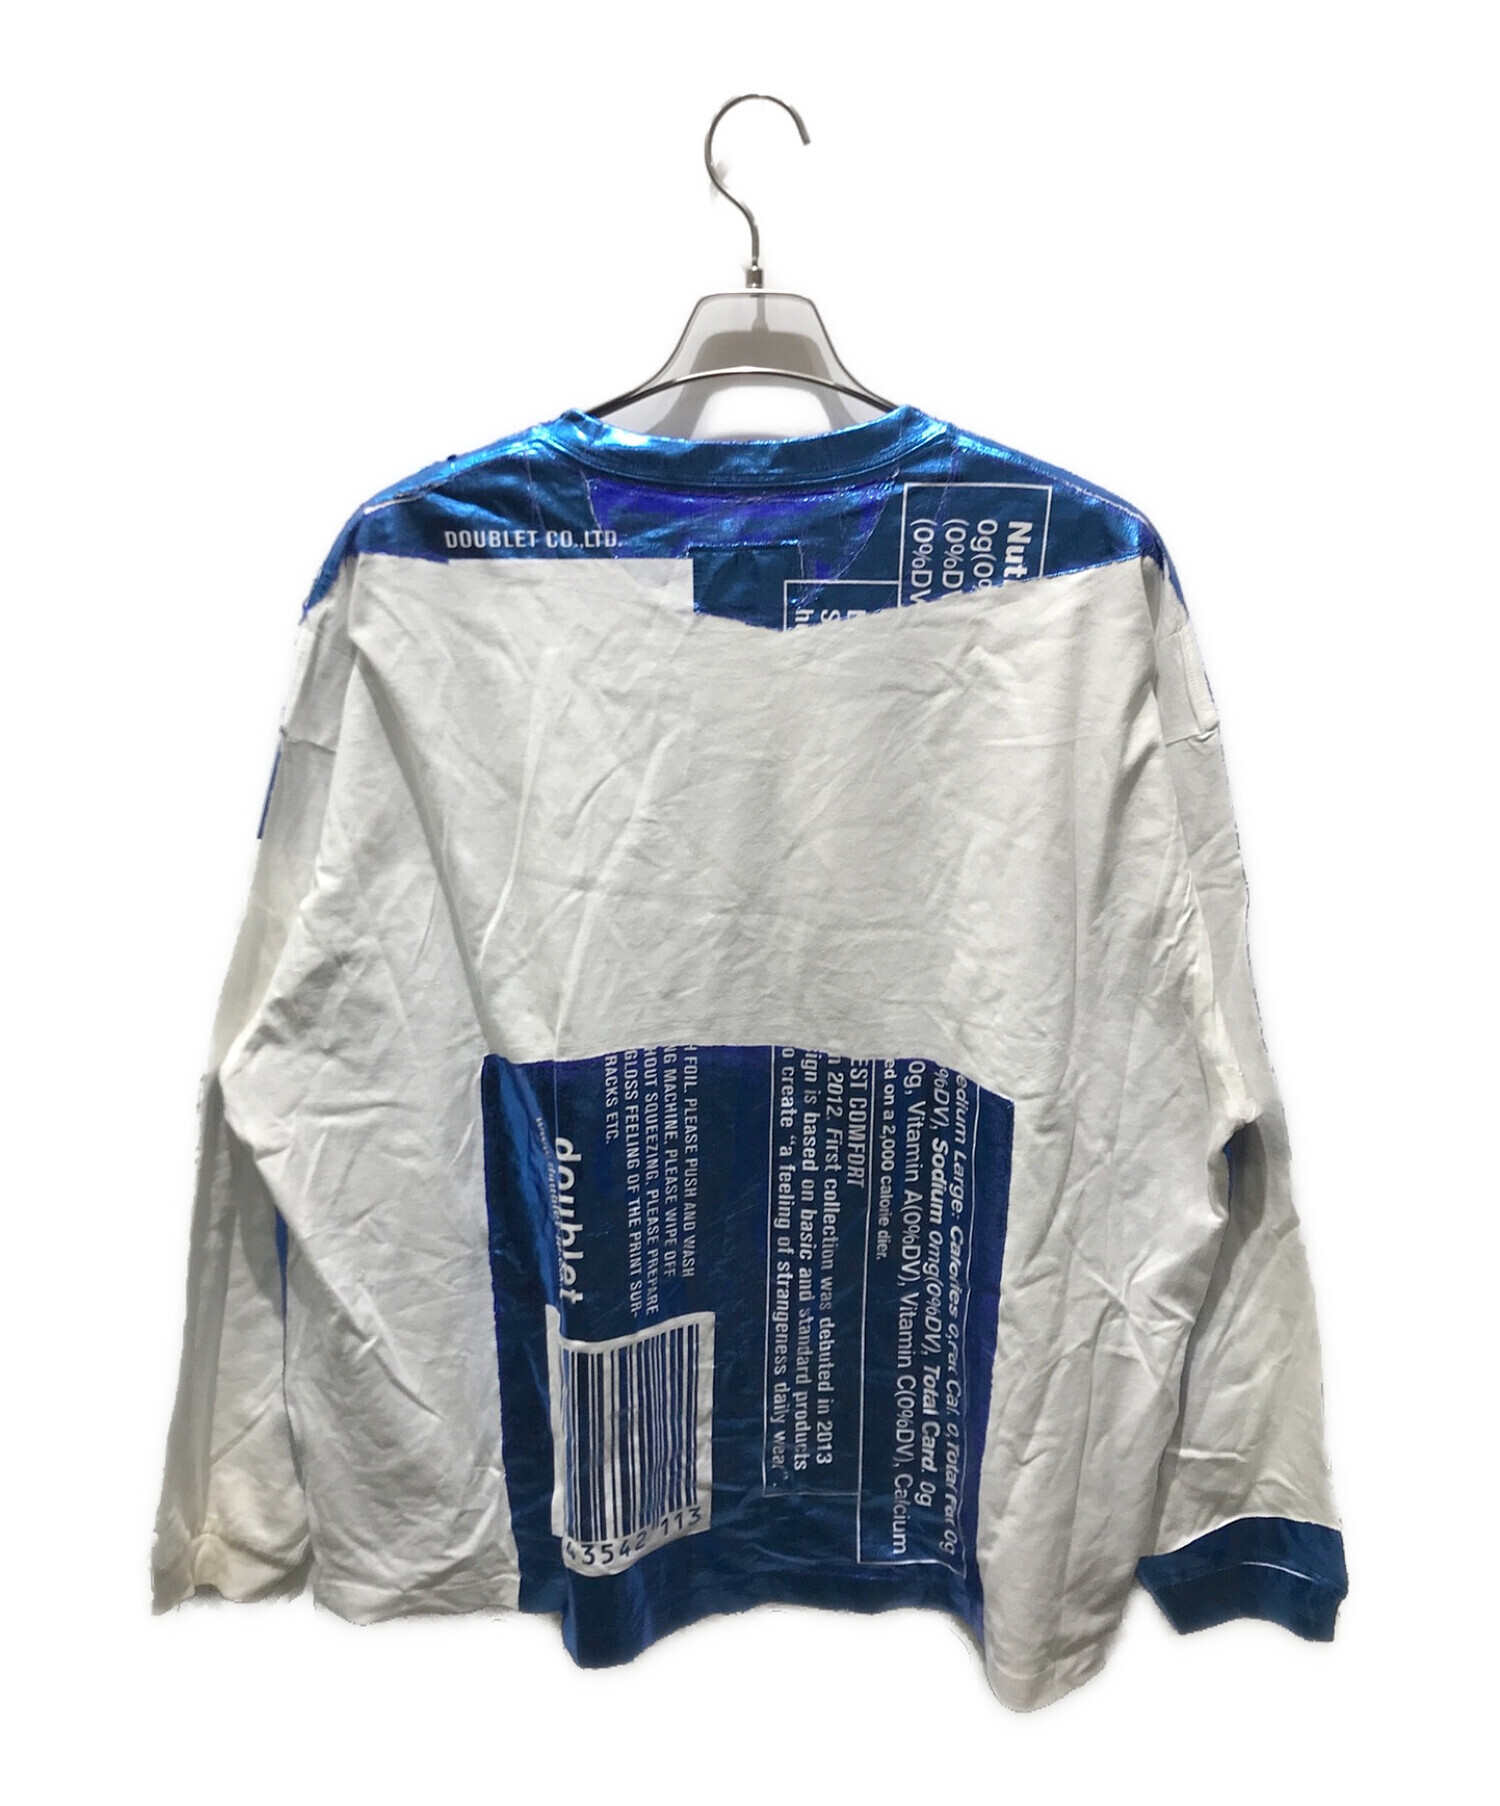 doublet (ダブレット) SNACK FOIL PACKAGE LONG SLEEVE T-SHIRT　18AW25CS101 ブルー サイズ:L